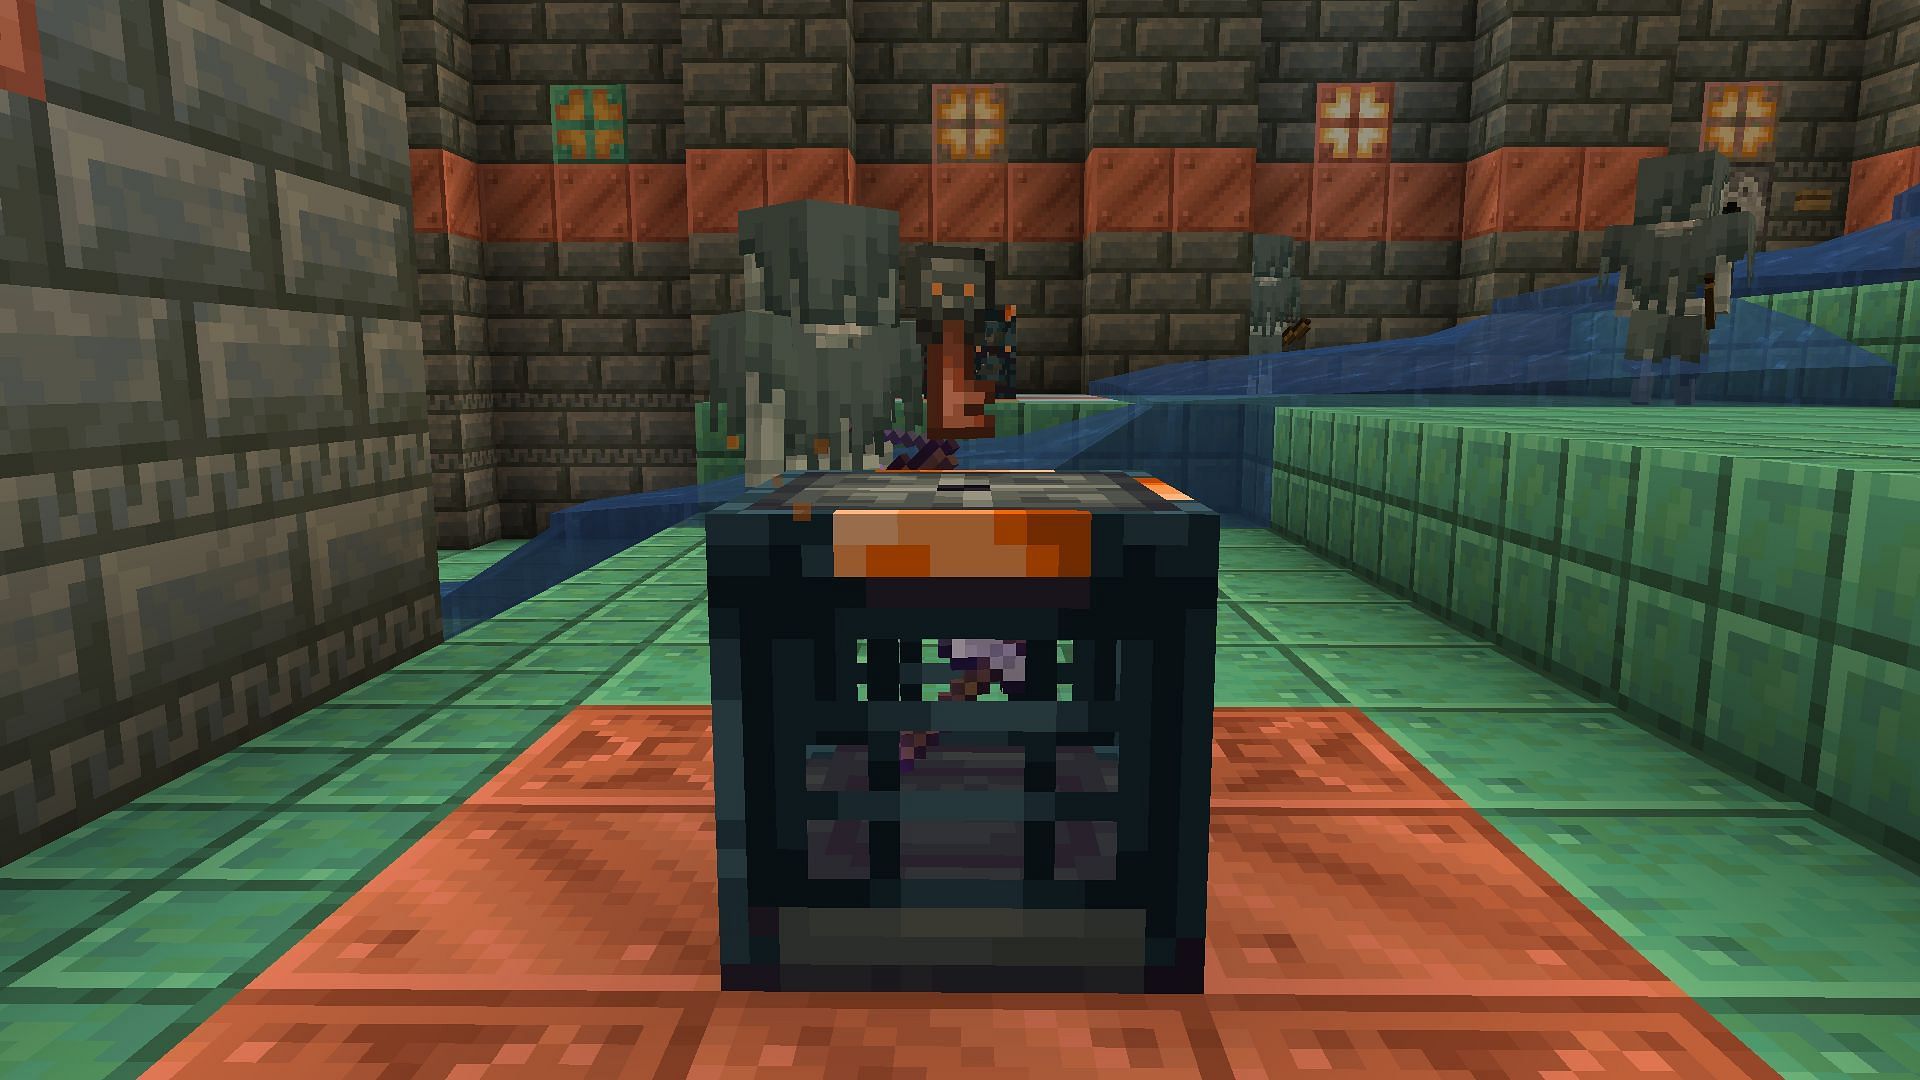 Vault block and trial key in the game (Image via Mojang)